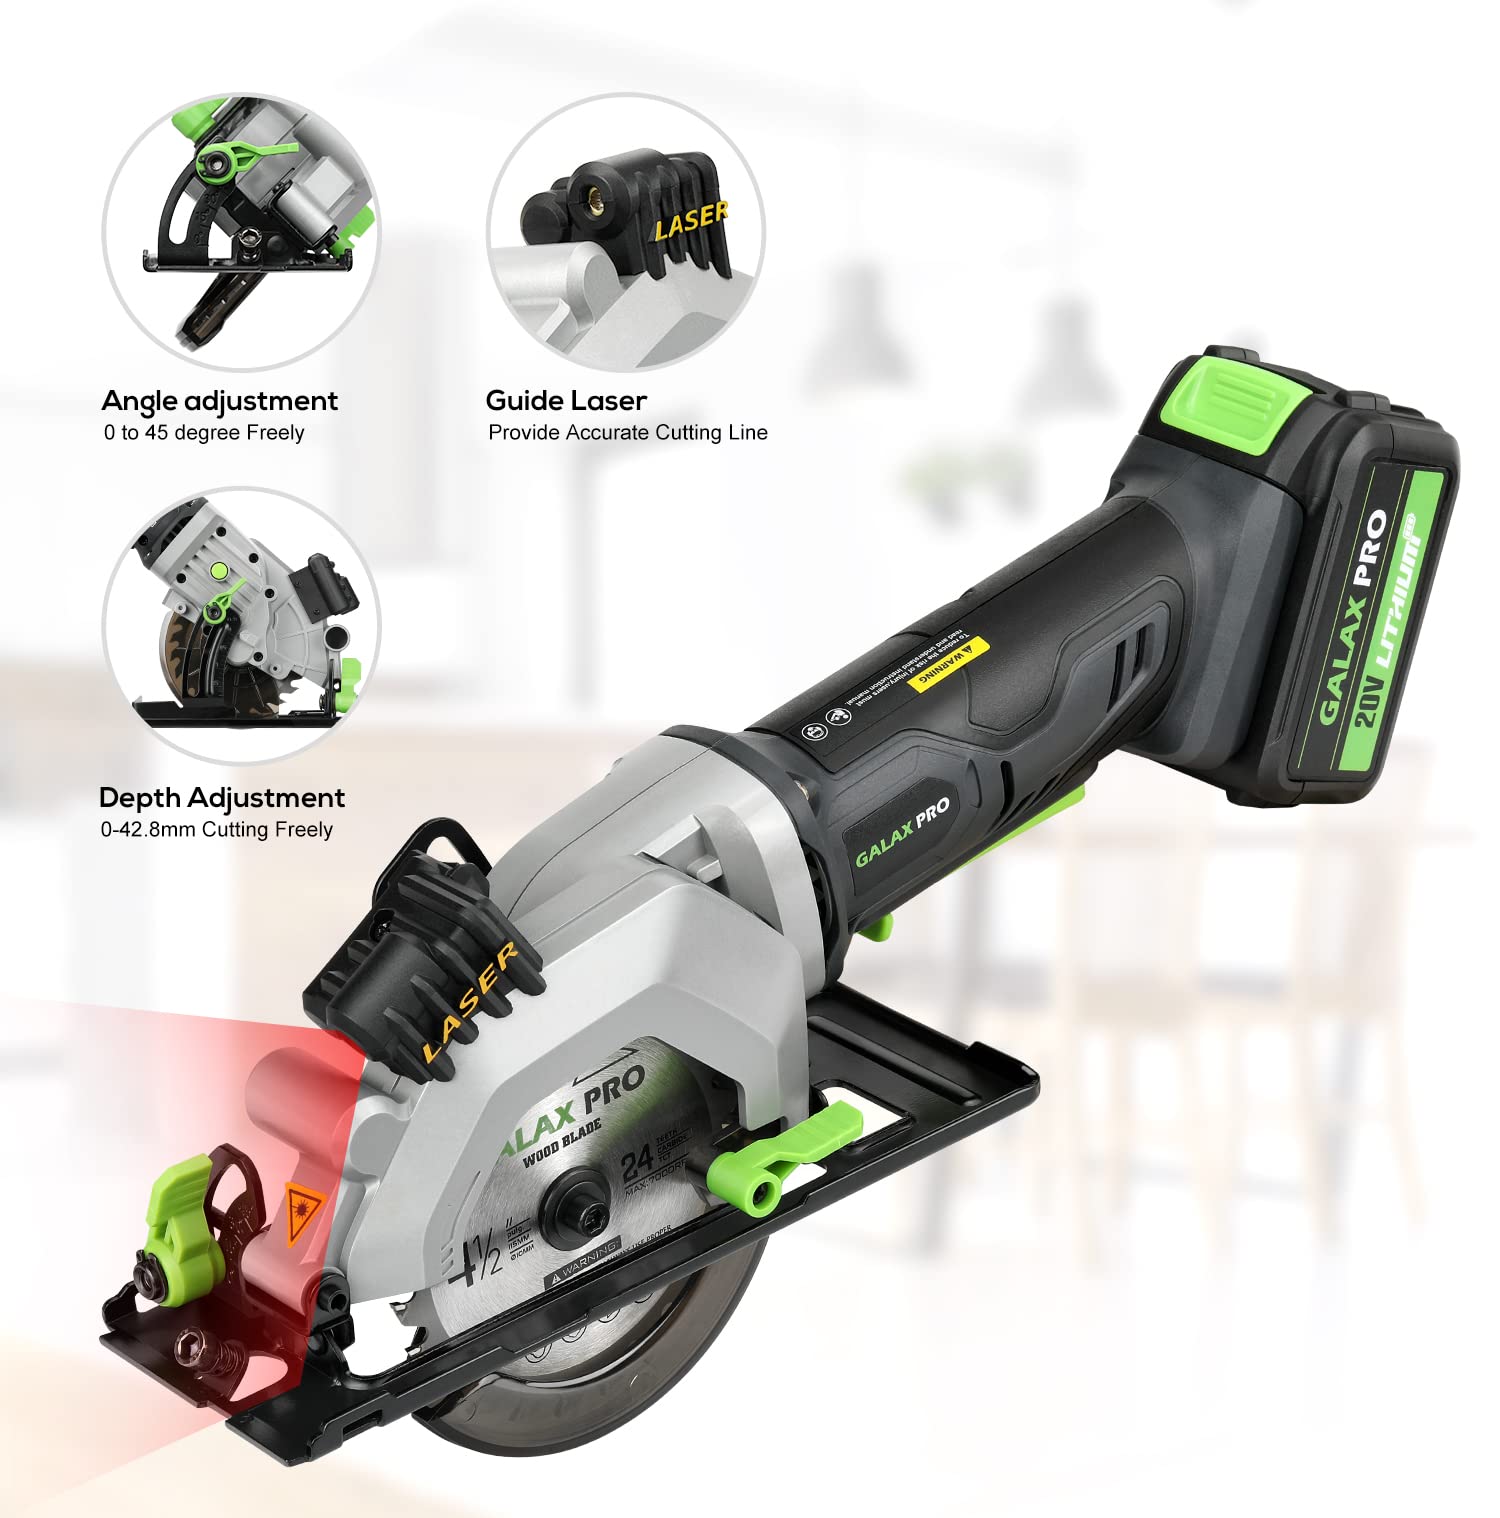 GALAX PRO Circular Saw and Reciprocating Saw Combo Kit with 1pcs 4.0Ah Lithium Battery and One Charger, 7 Saw Blades and Tool Bag